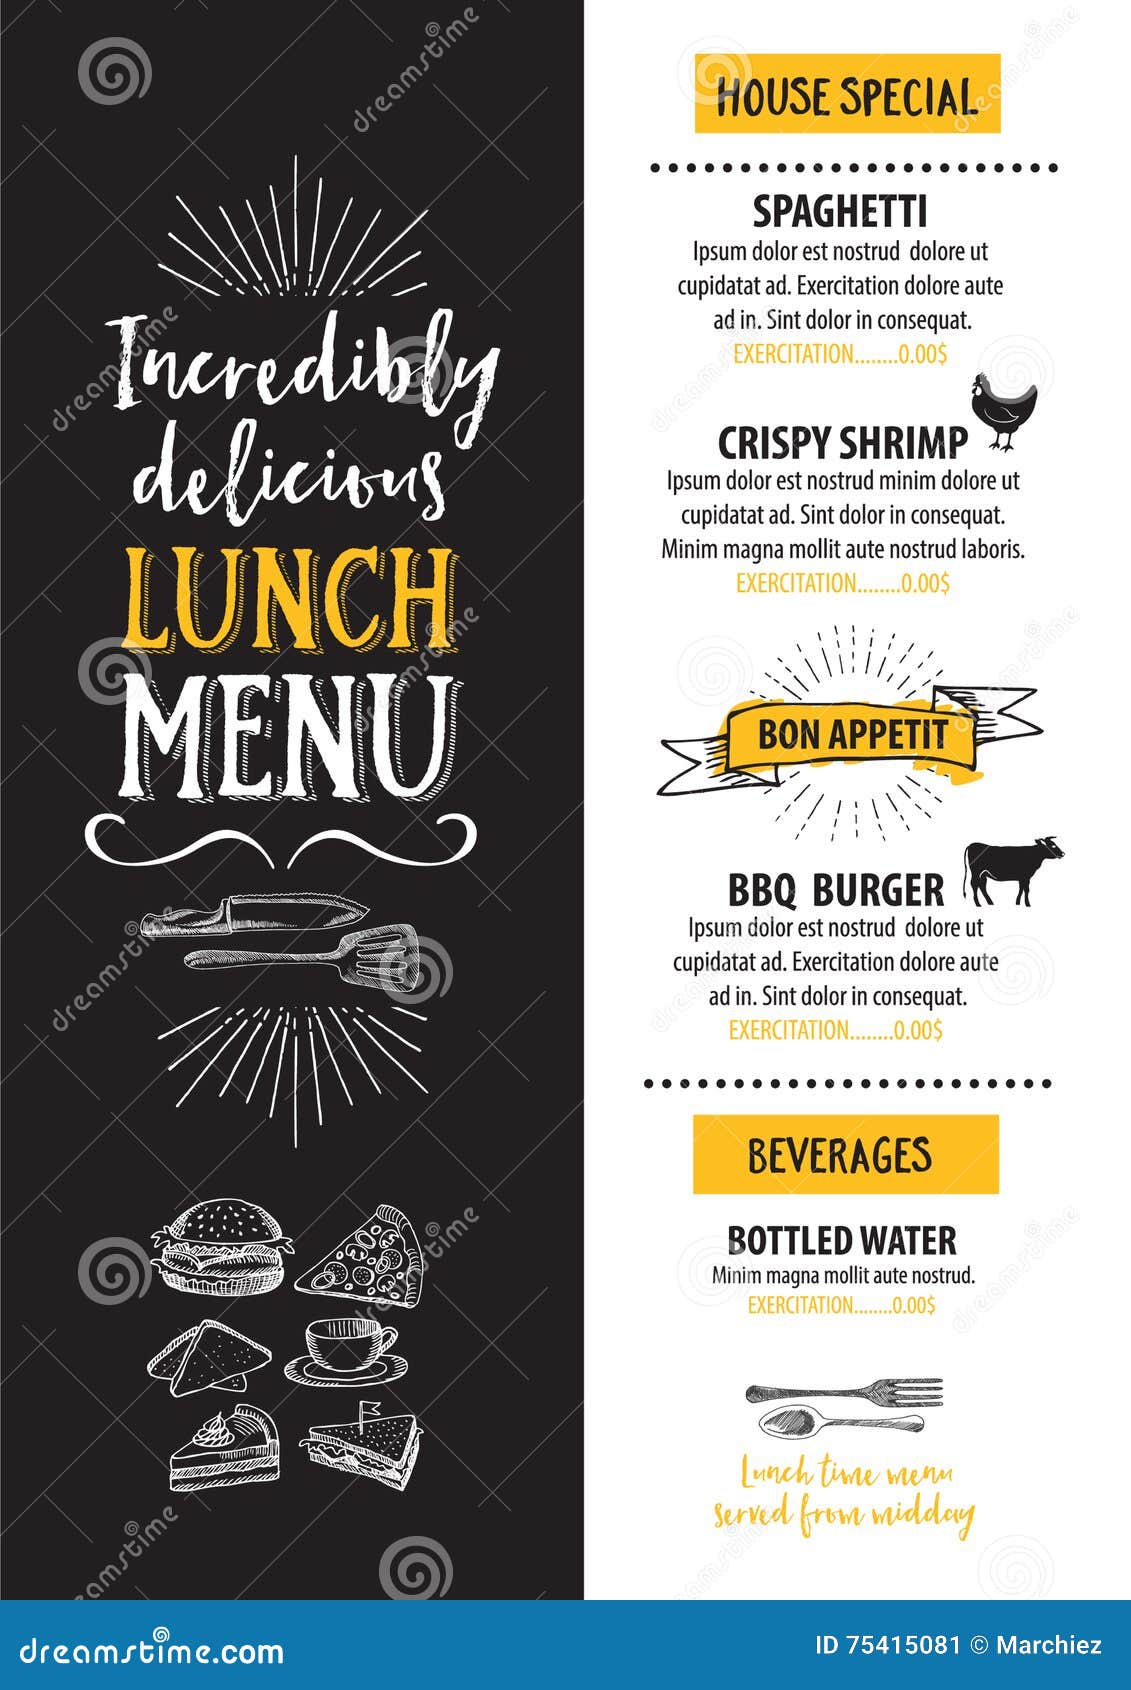 Menu Cafe Restaurant Template Placemat Food Board Design Stock Vector Illustration Of Grill Italian 75415081